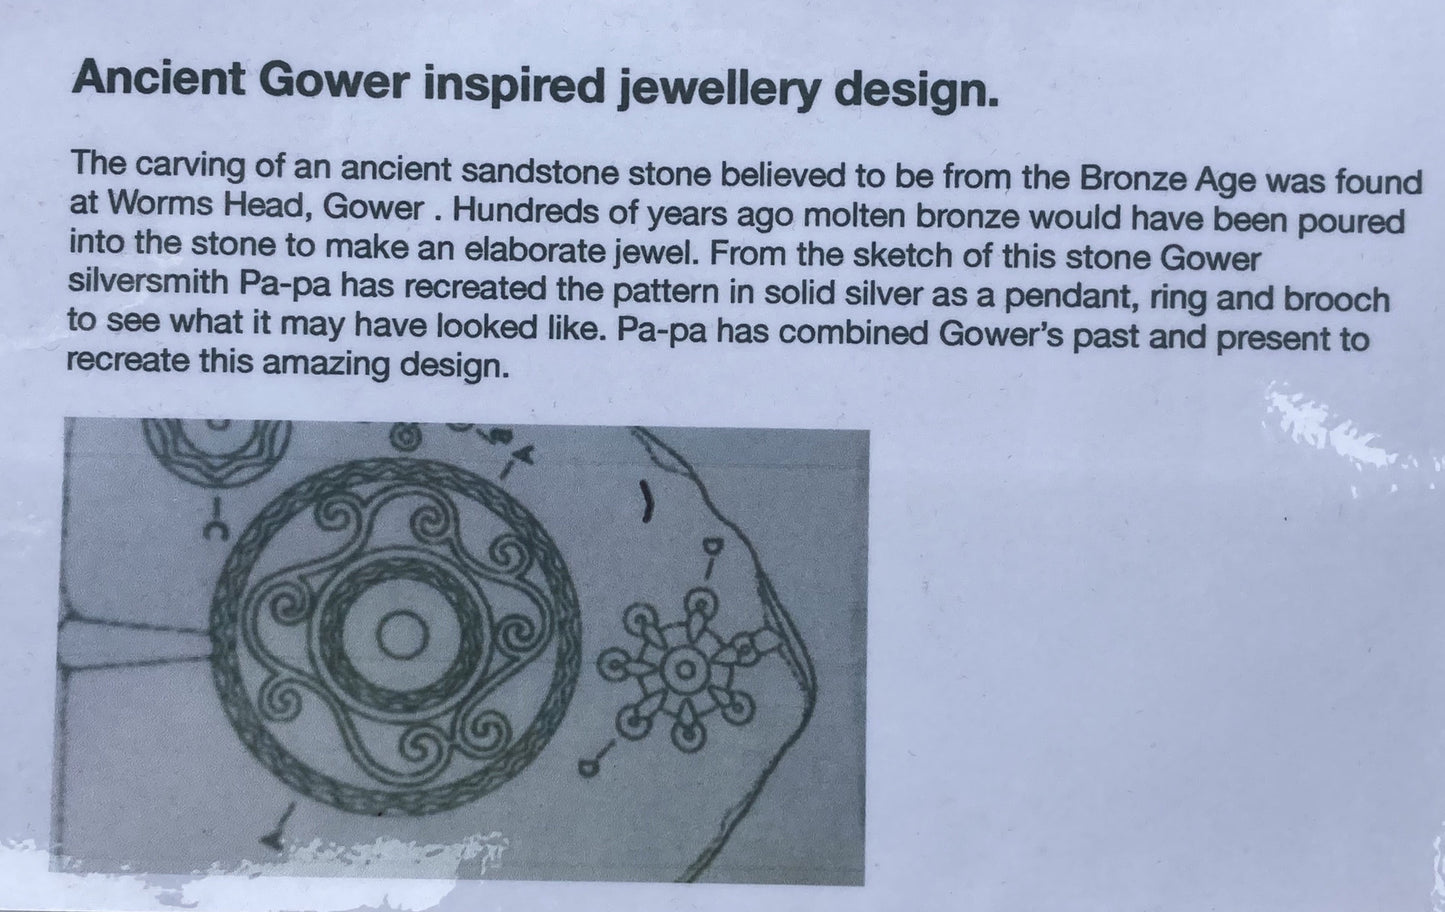 Copy of original Drawing of bronze age carving in sandstone found on Gower.